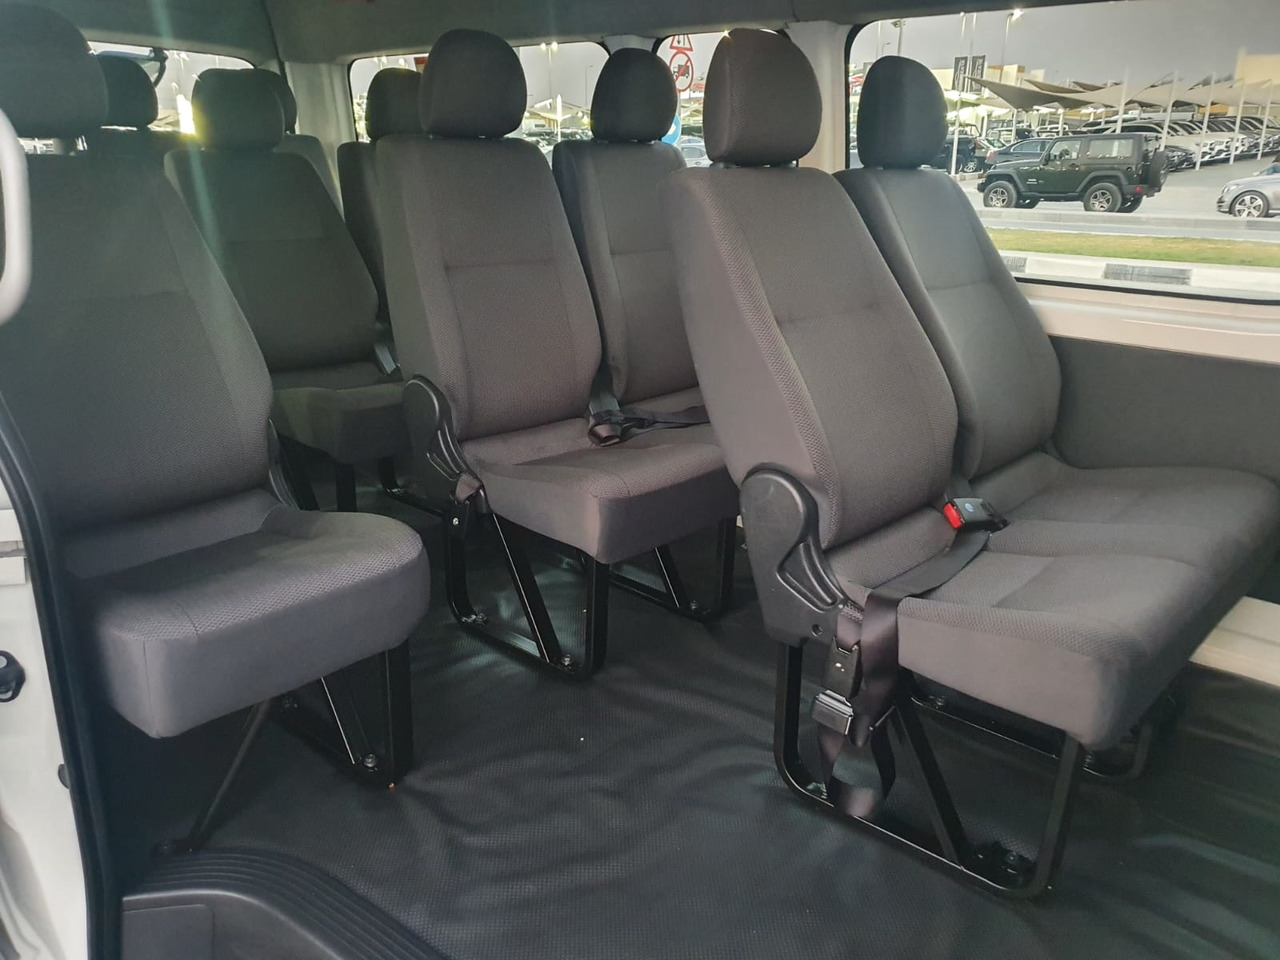 Leje en TOYOTA Hiace ... High Roof - 16 places TOYOTA Hiace ... High Roof - 16 places: billede 5